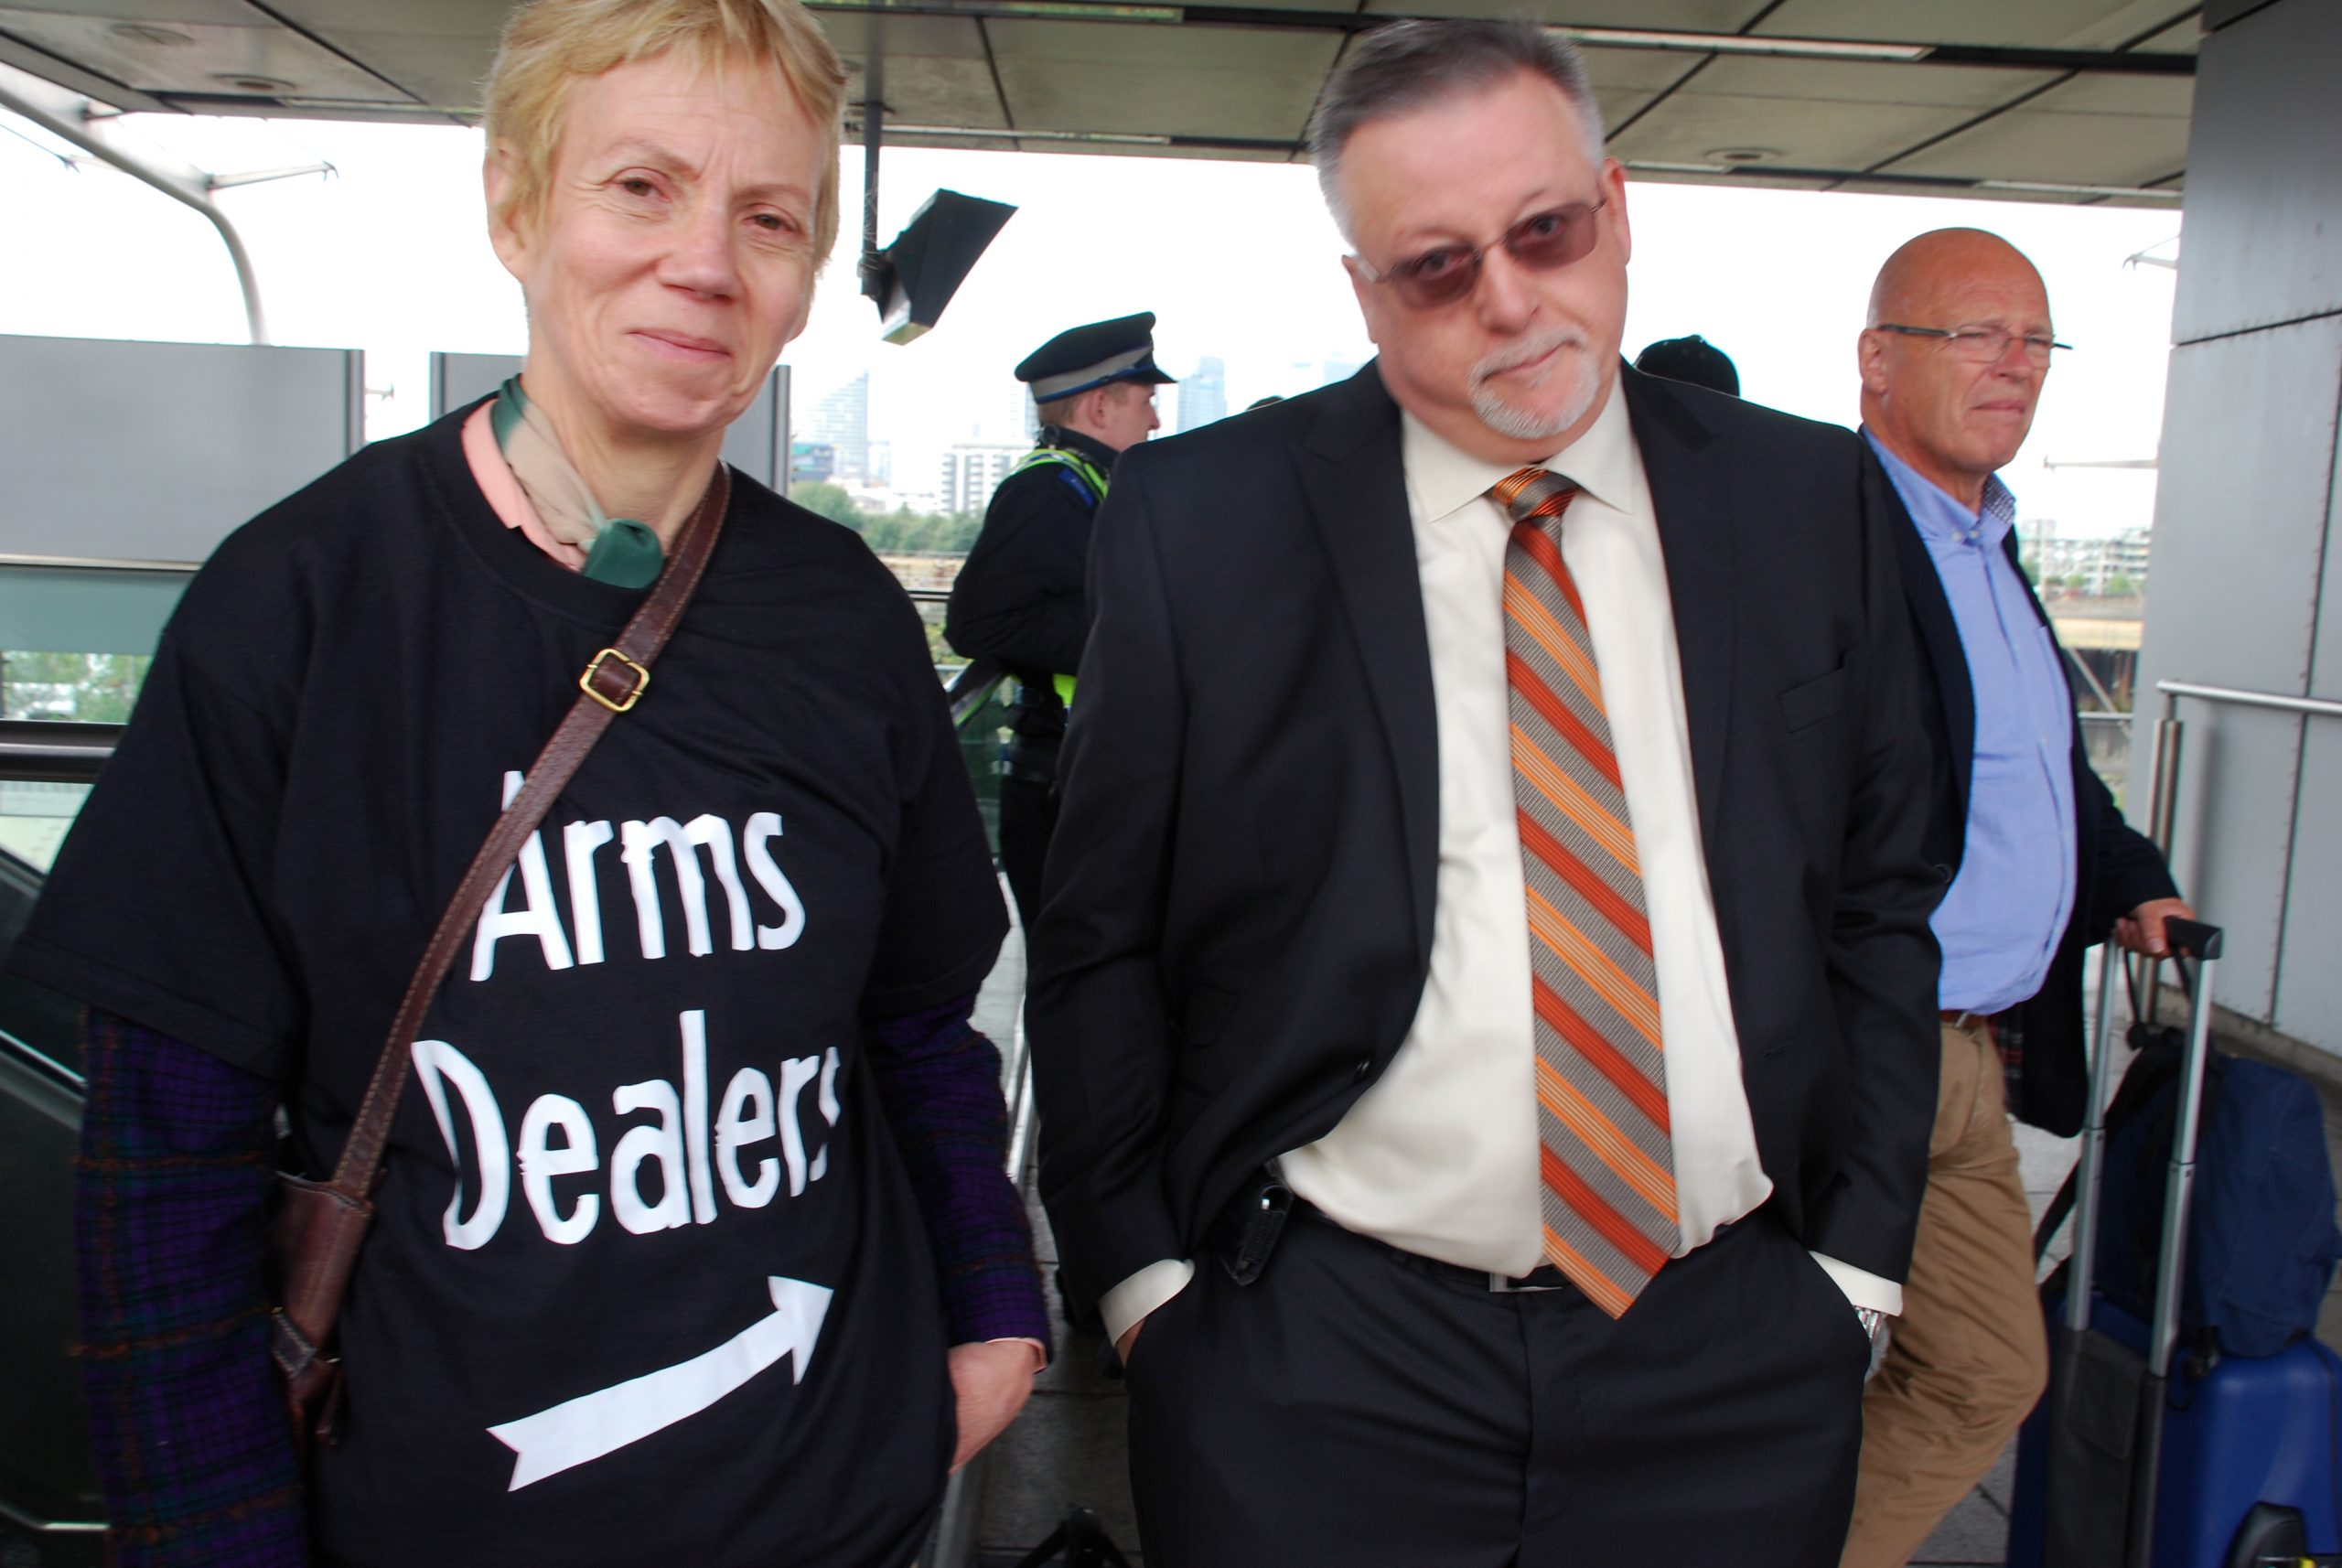 Activist with a T-shirt reading &quot;Arms Dealer&quot; and an arrow pointing sideways stands next to an arms fair delegate